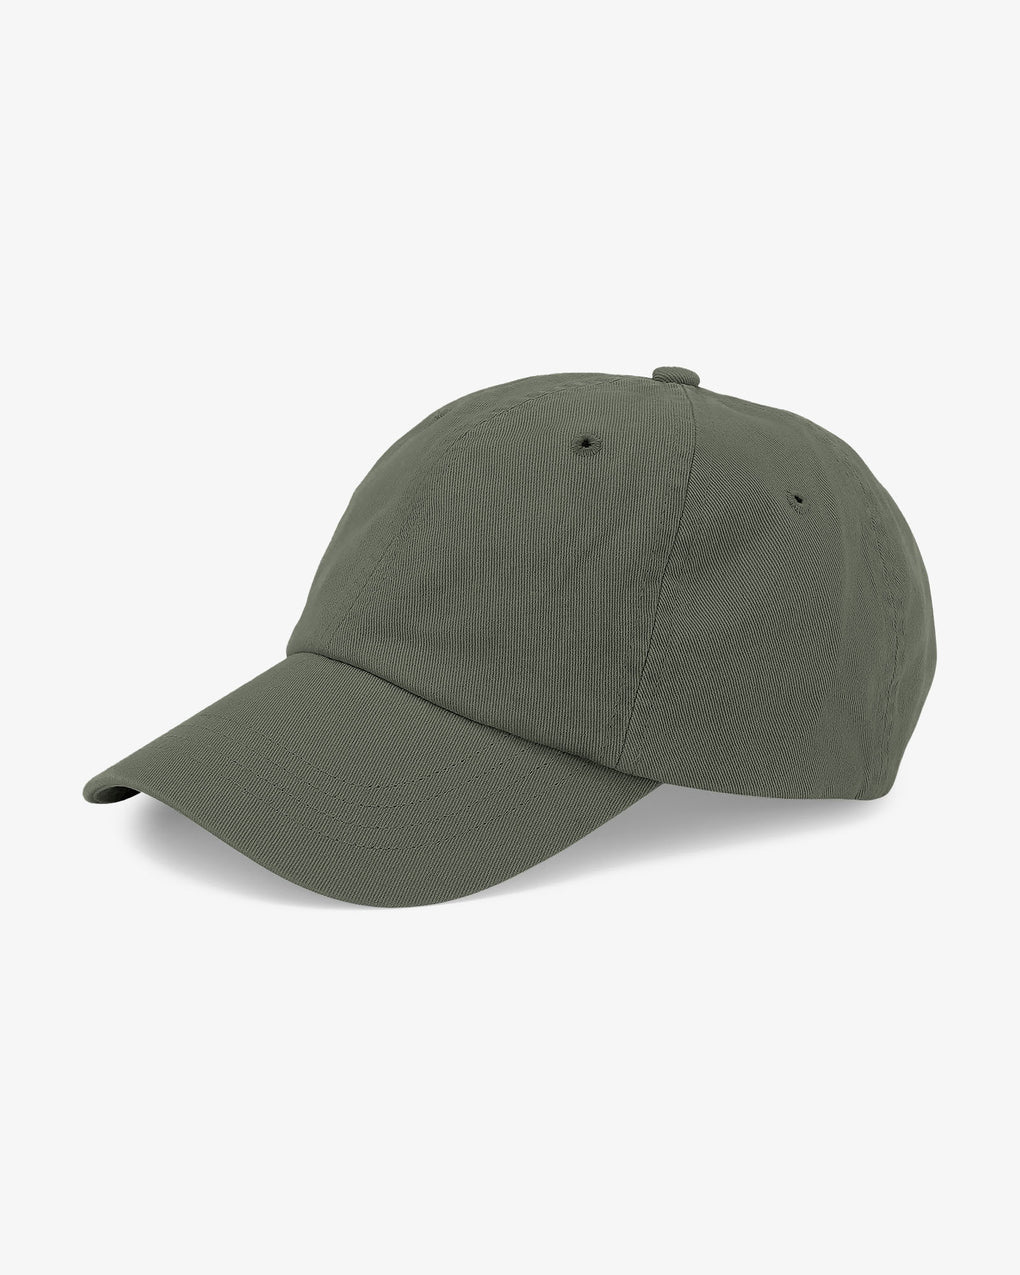 Colorful Standard Organic Cotton Cap in olive green on a white background.